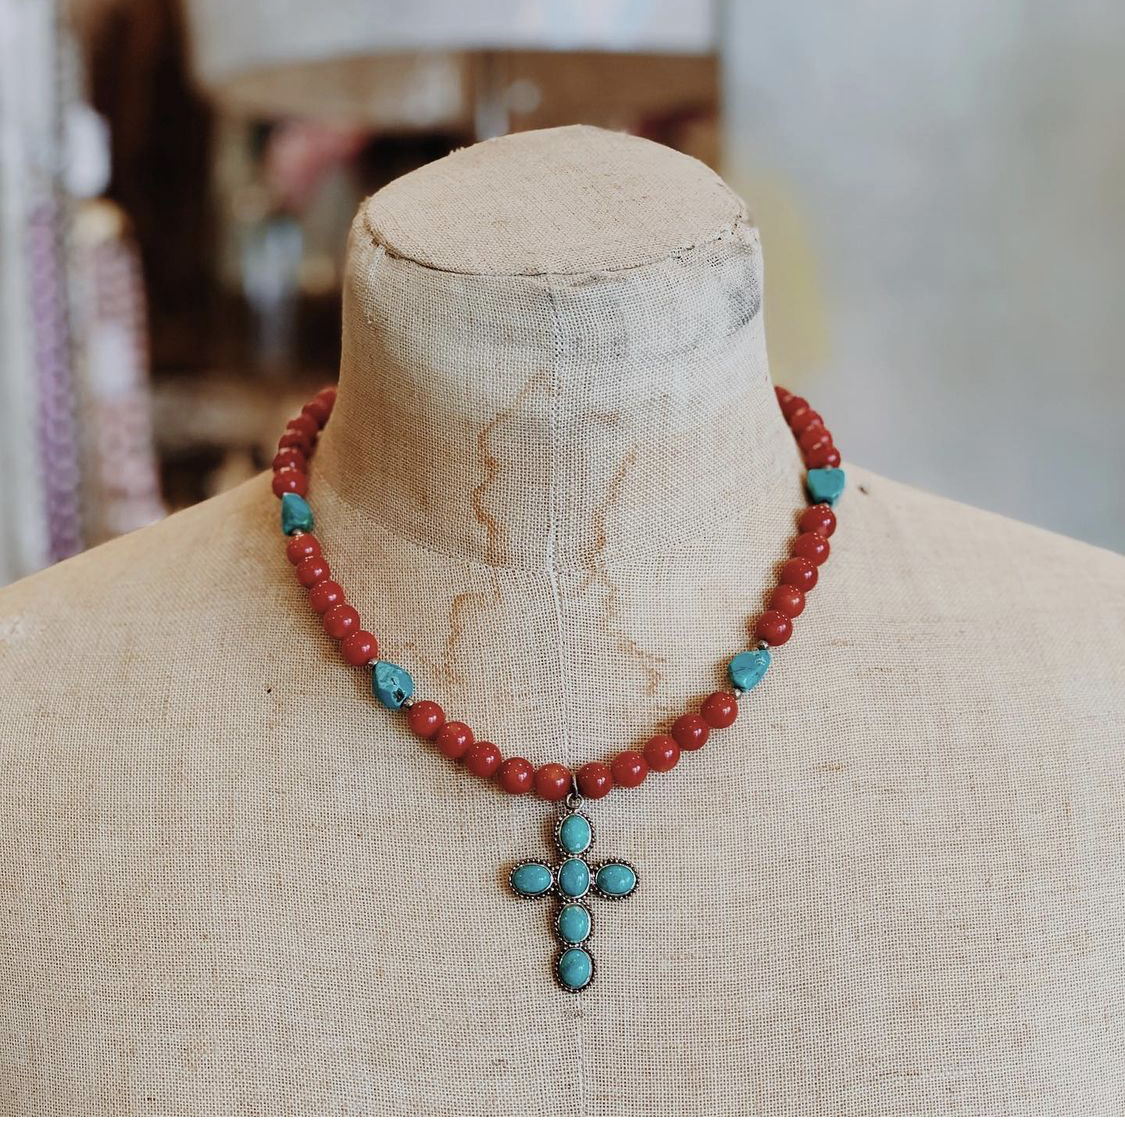 Such a fun piece with red and turquoise paired beautifully!